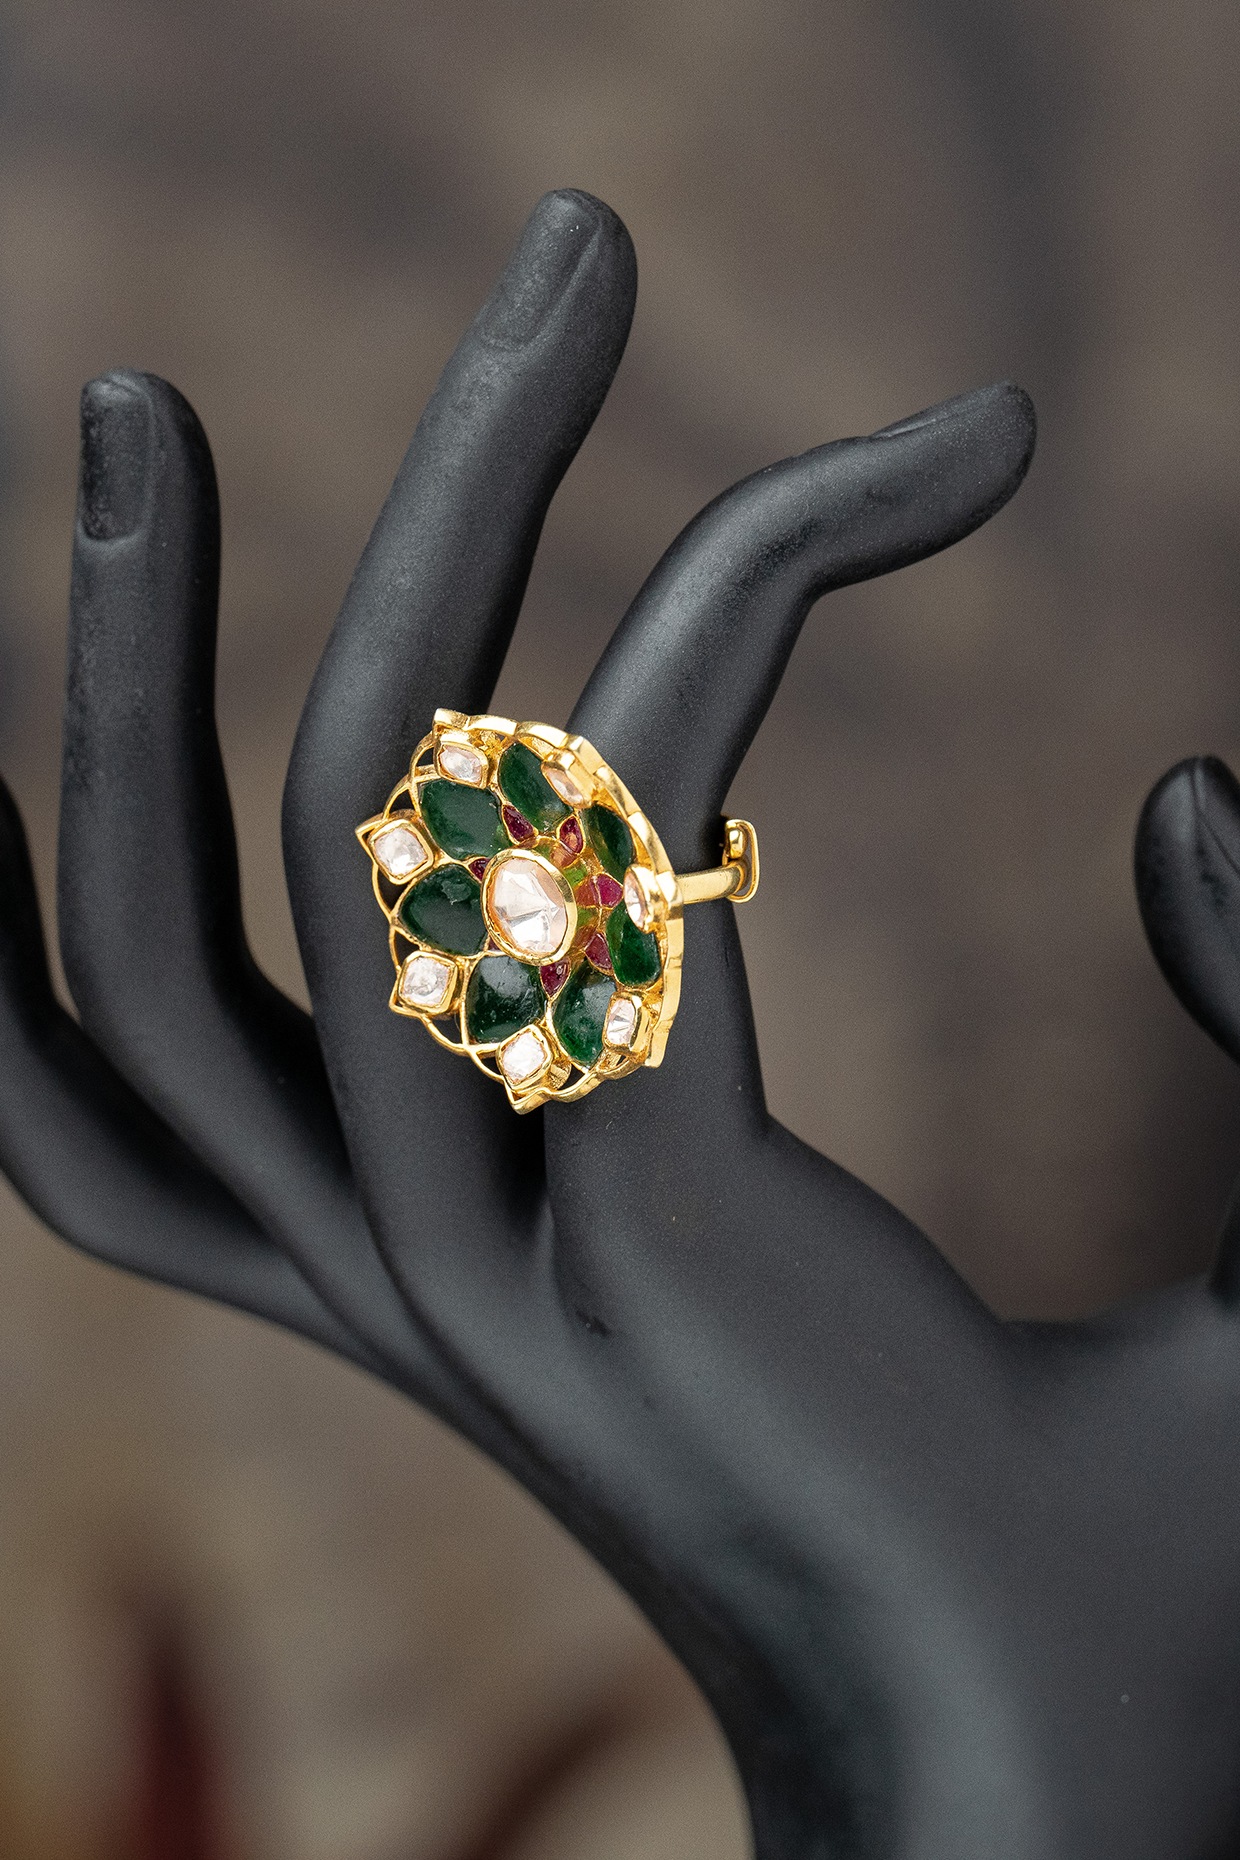 Fashion Gold Ring With Natural Dark Green Emerald Stone. Stock Photo,  Picture and Royalty Free Image. Image 187484826.